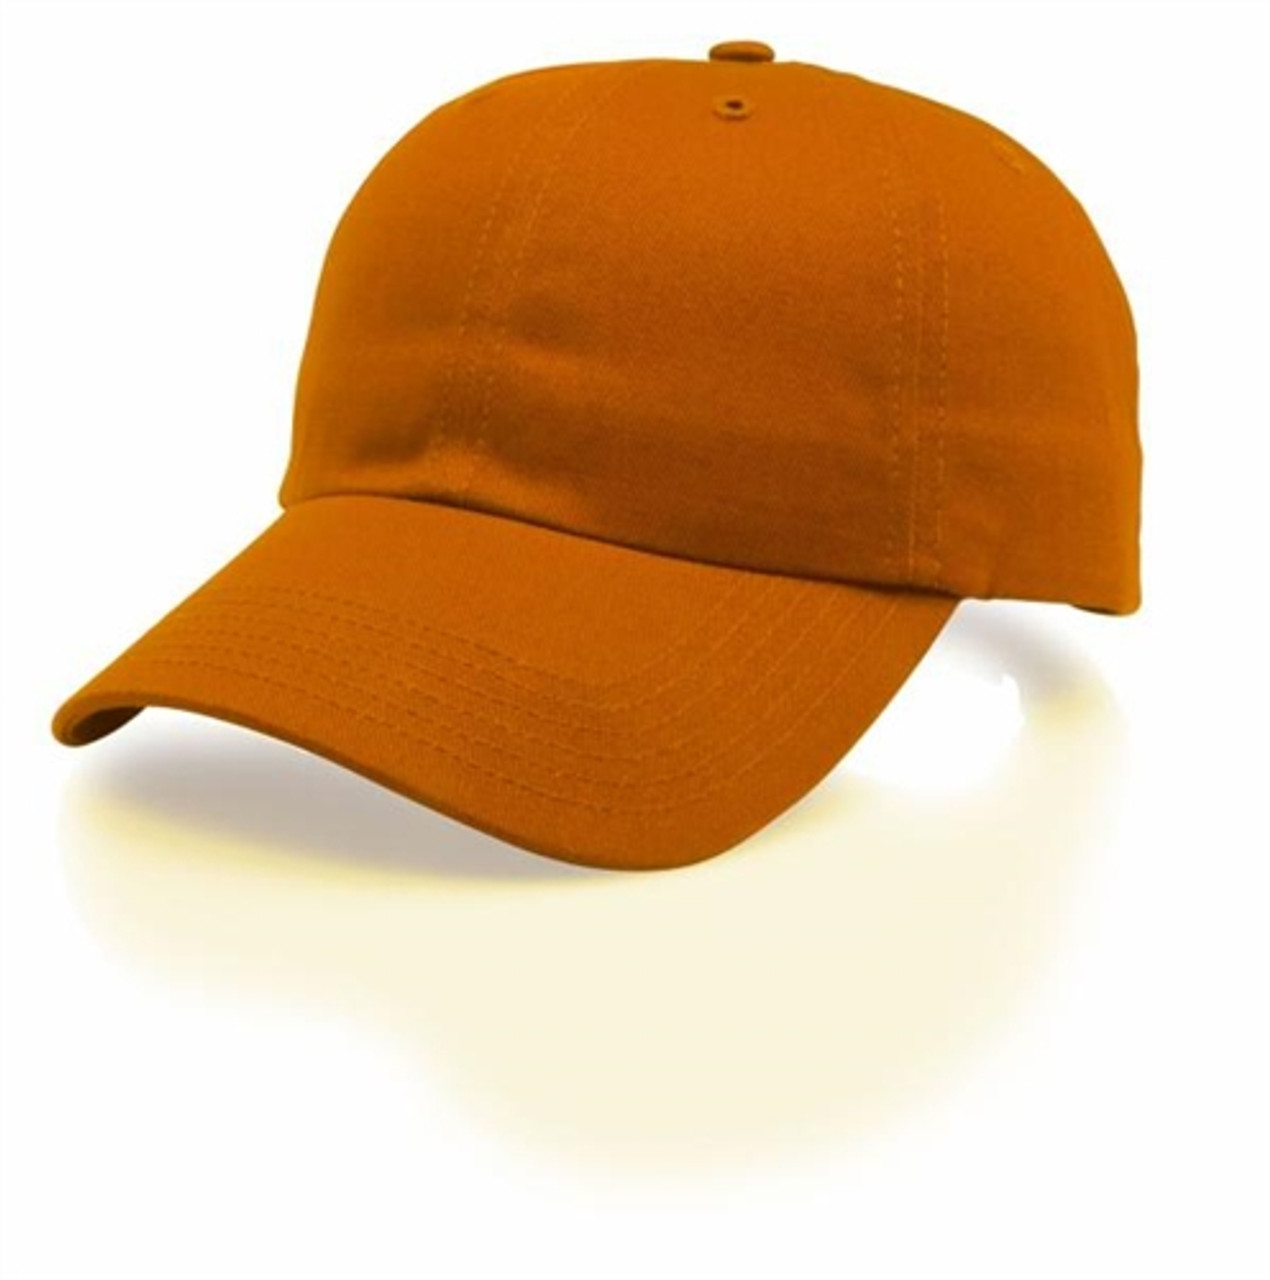 Embroidered Cotton Twill Adjustable Cap